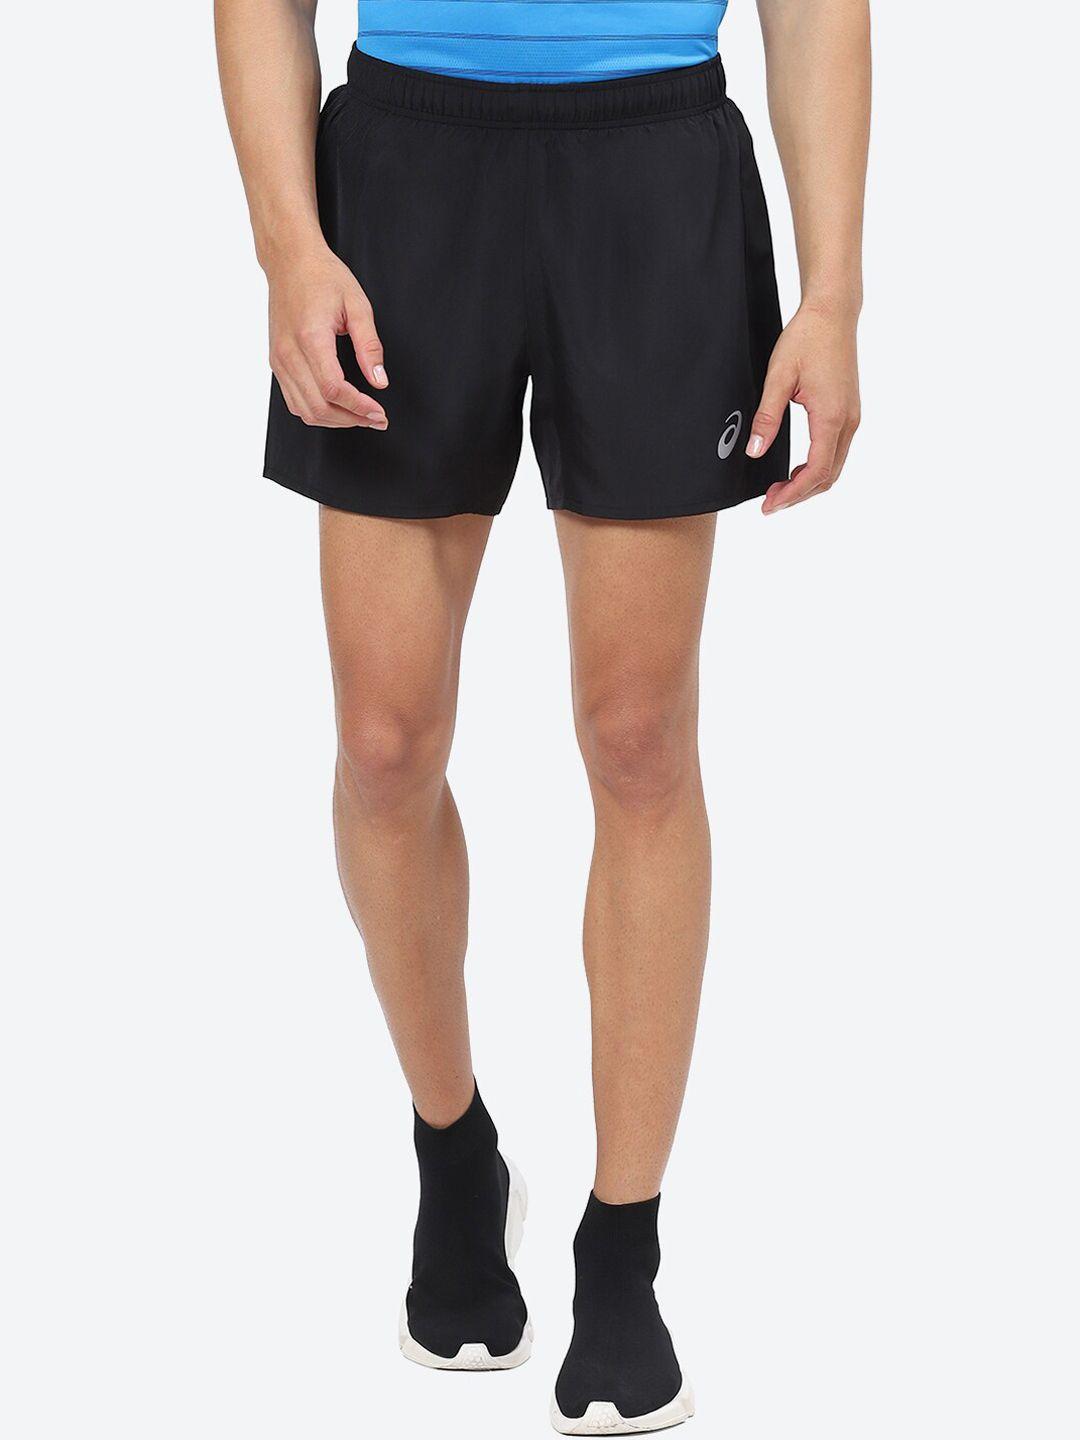 asics men silver 5in above knee shorts